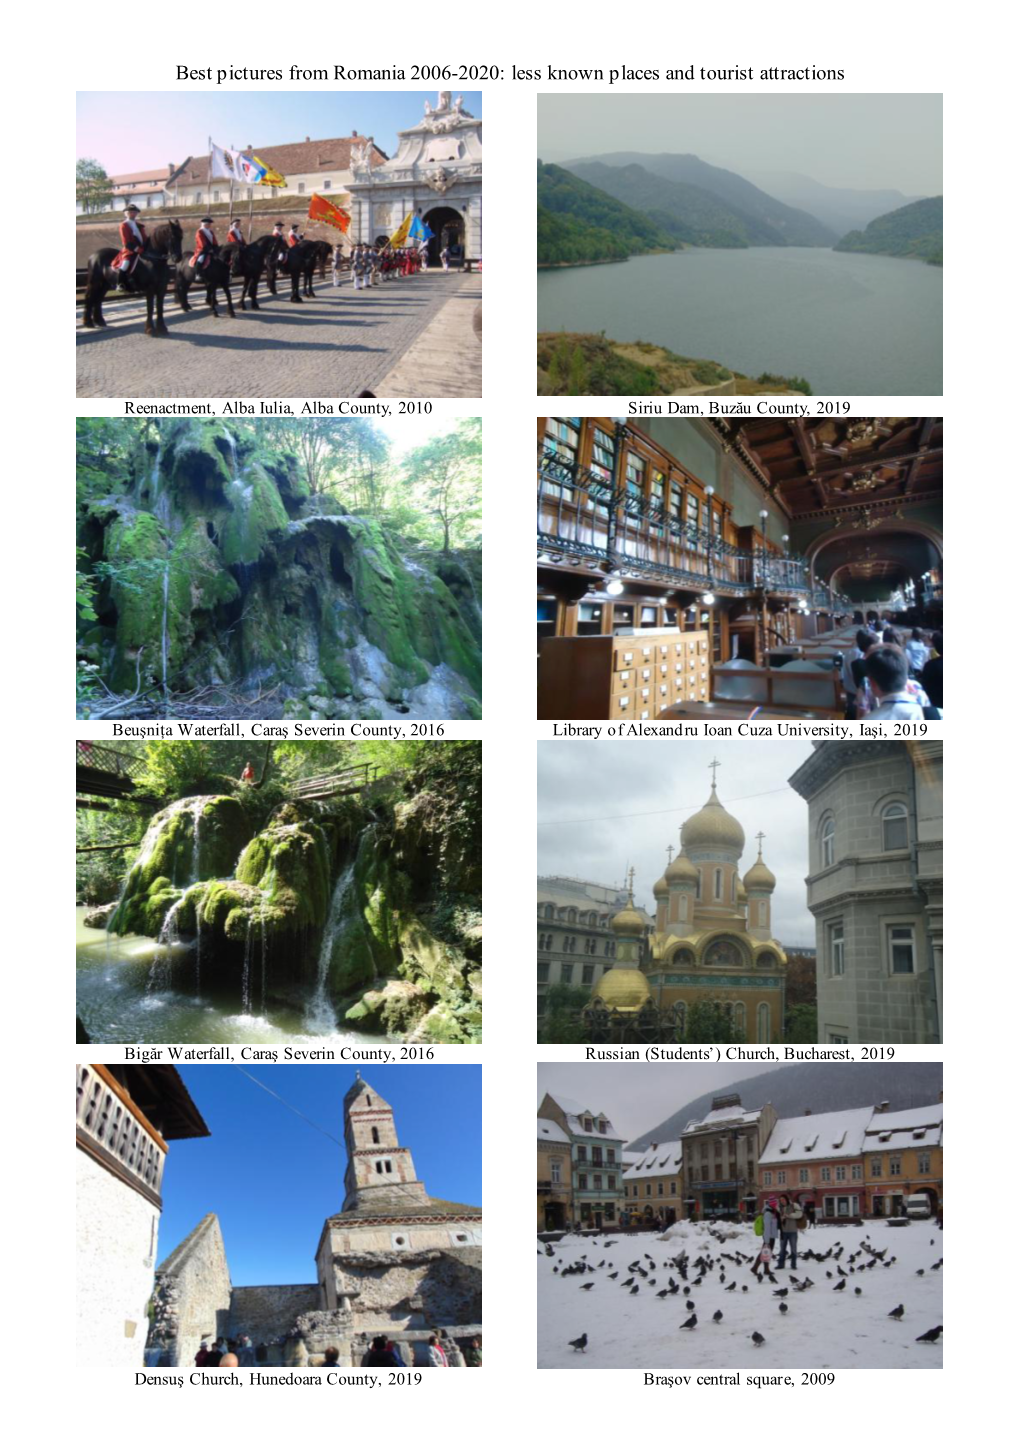 Best Pictures from Romania 2006-2020: Less Known Places and Tourist Attractions